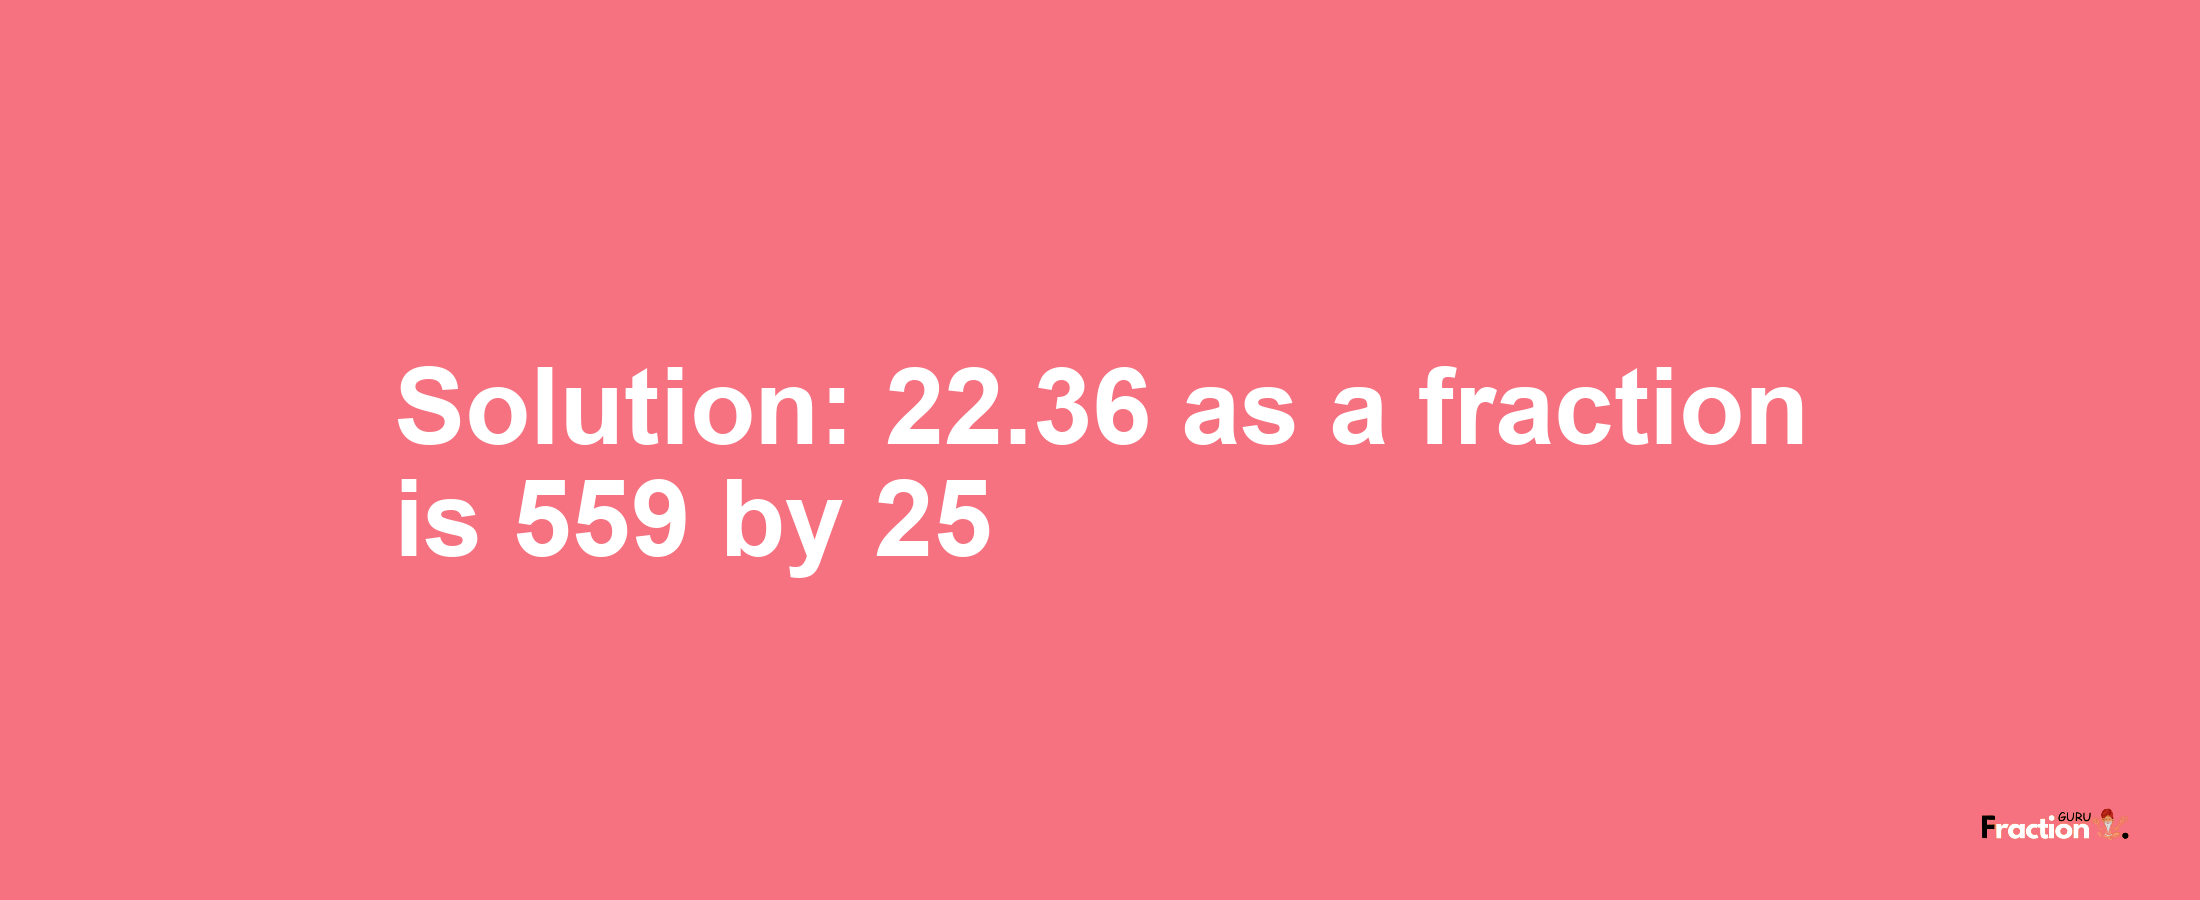 Solution:22.36 as a fraction is 559/25